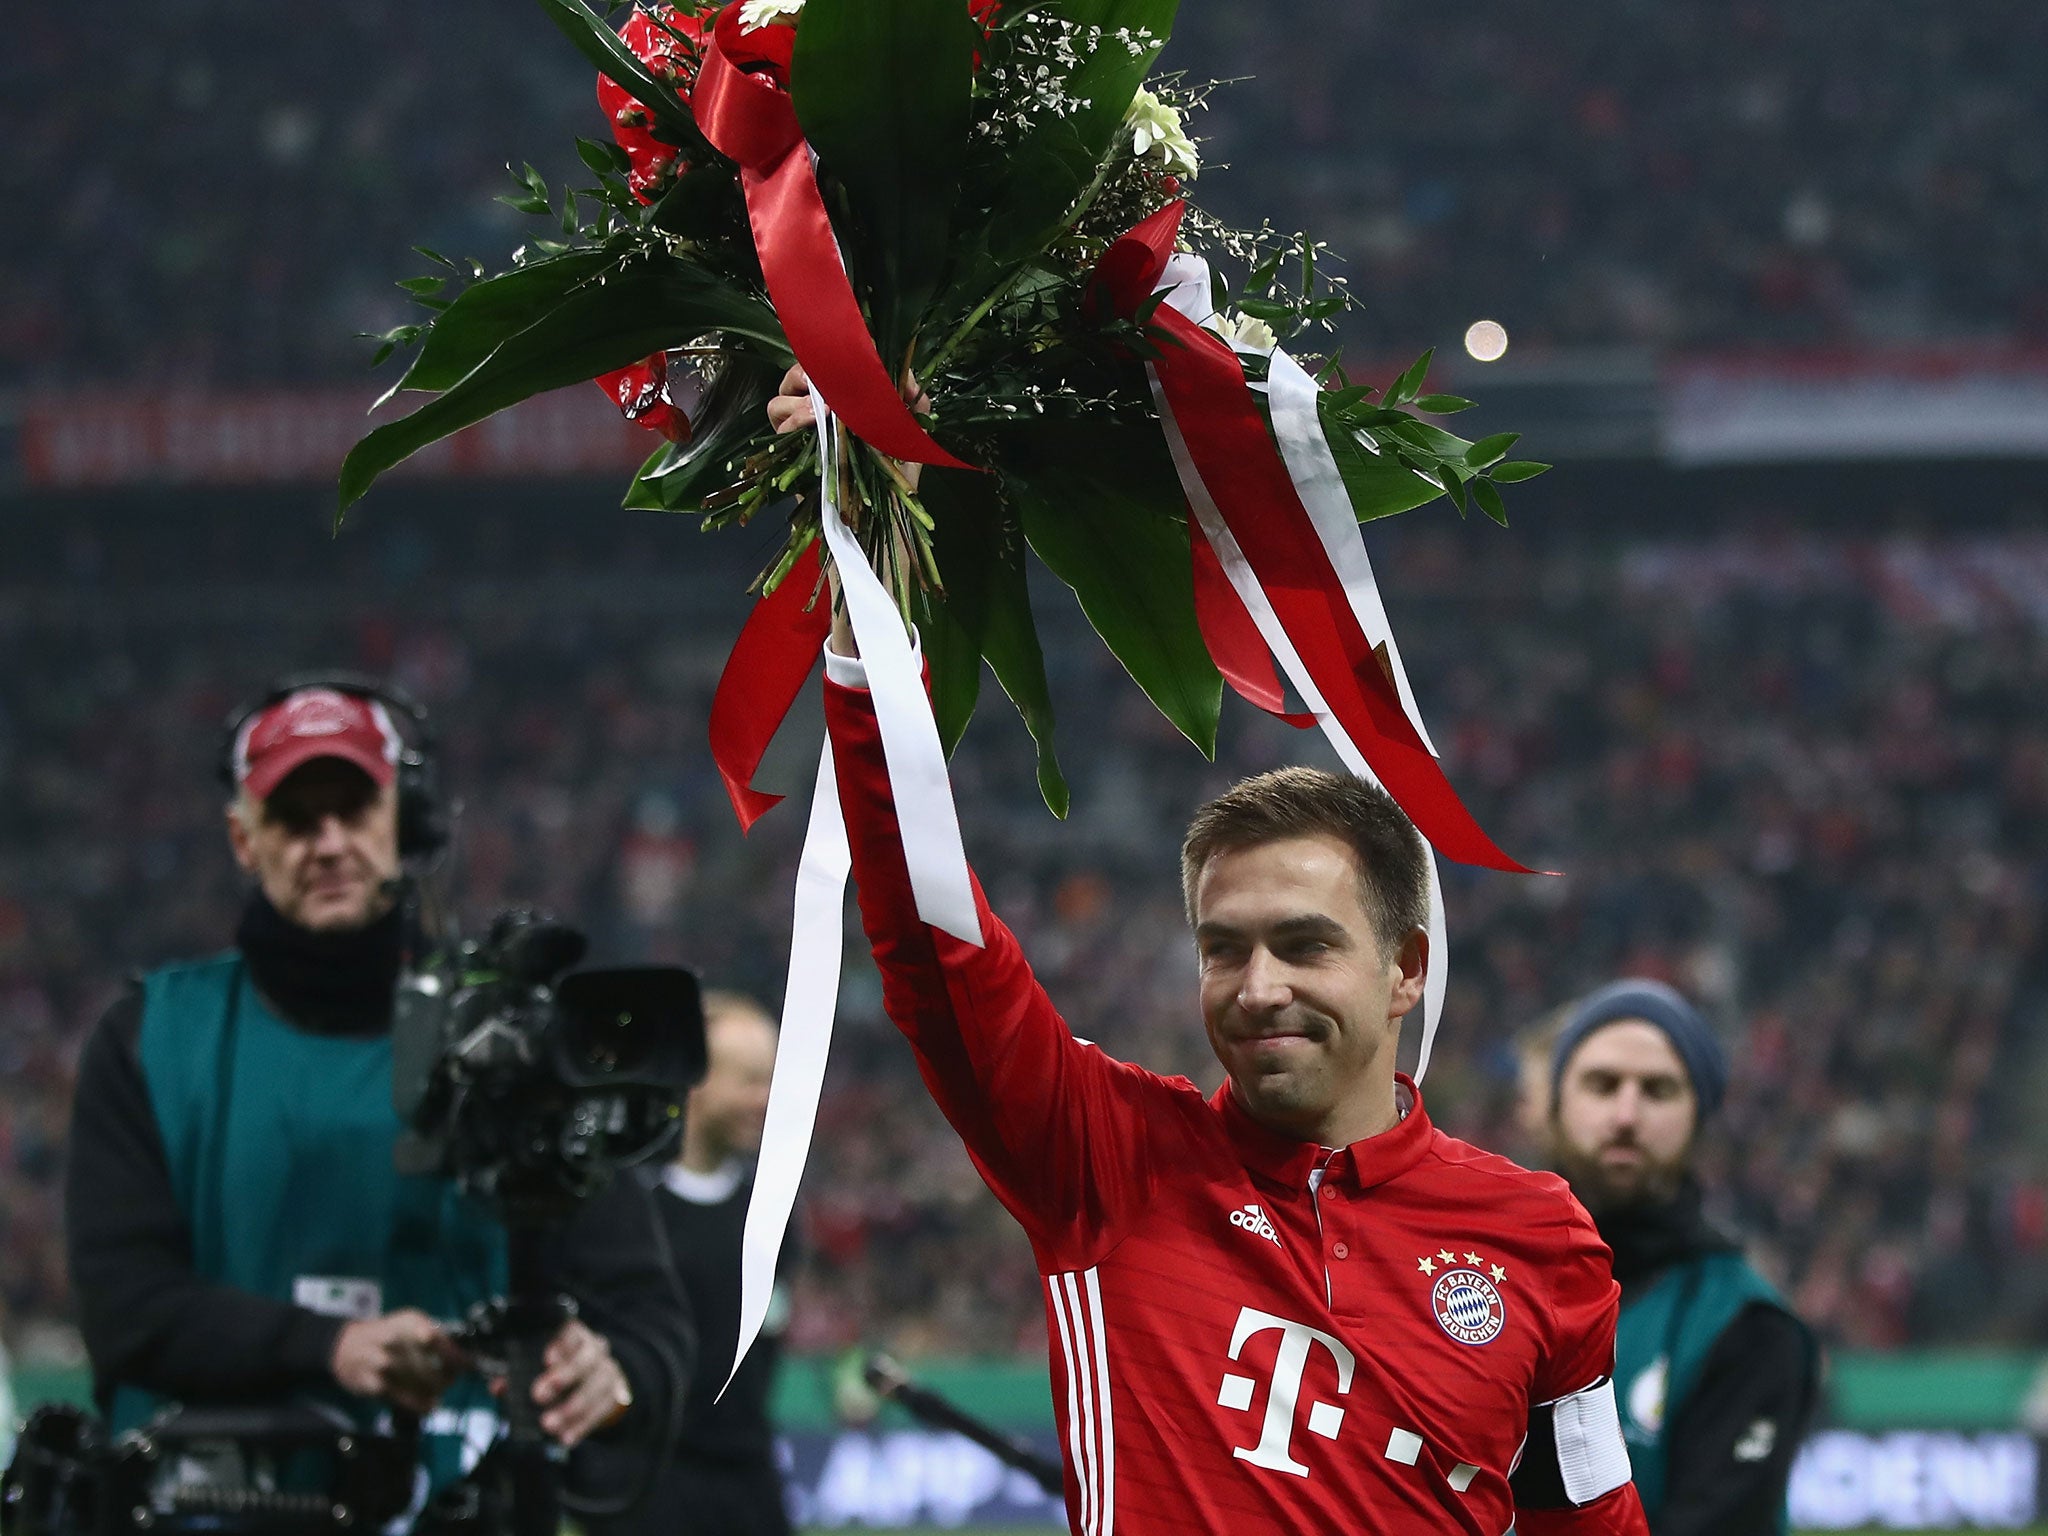 Philipp Lahm has announced his retirement from football at the end of the season